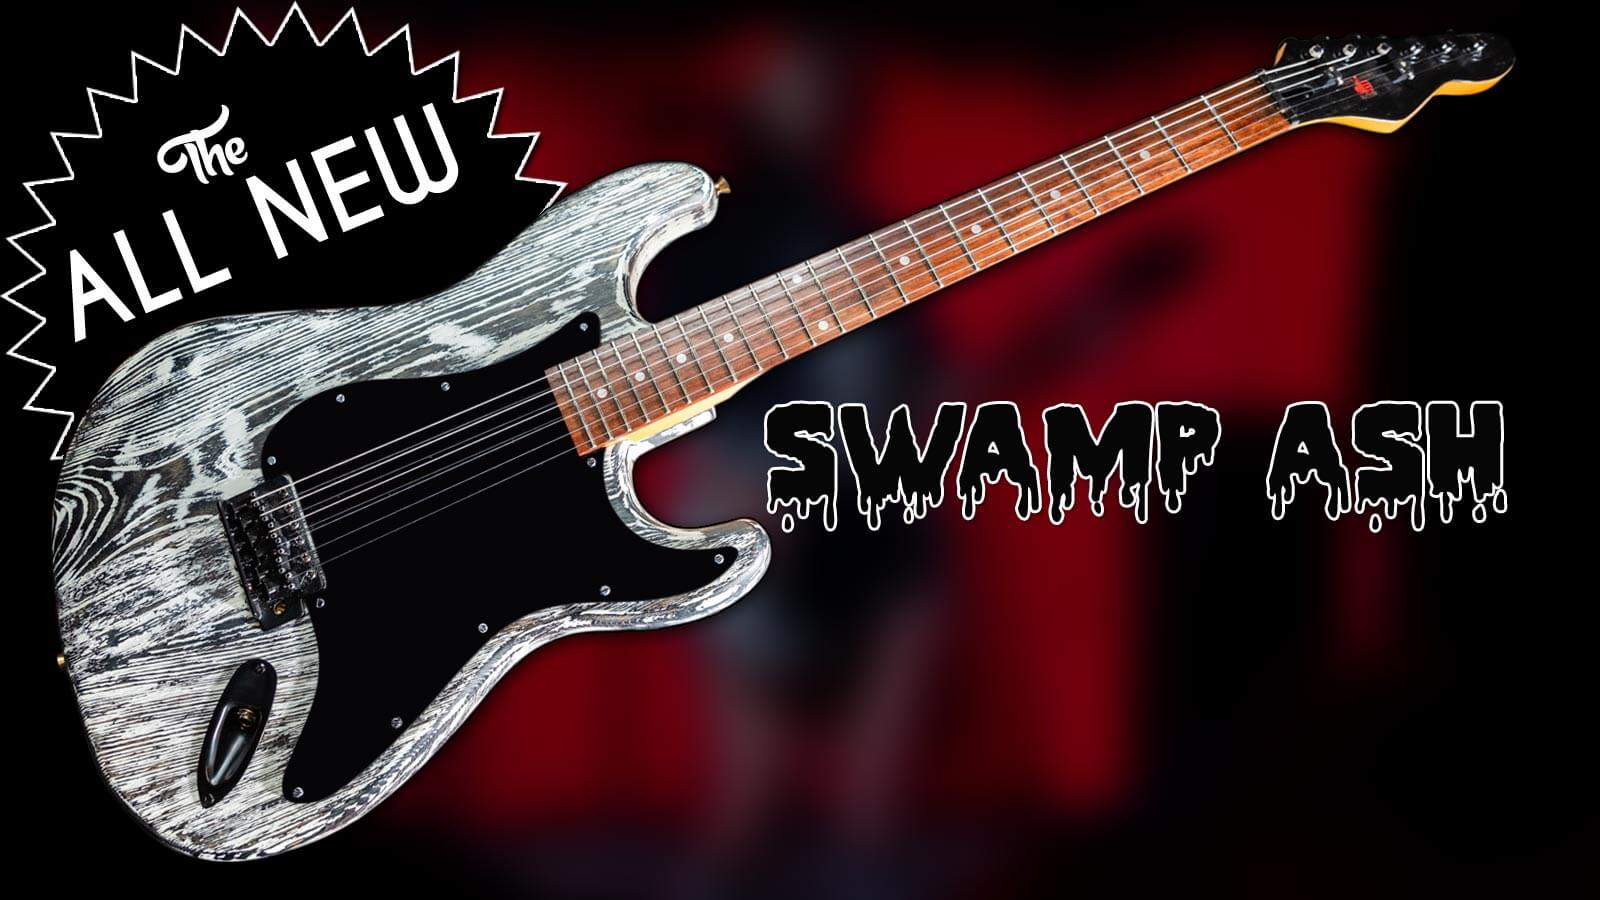 This is an image of Thumbgroove's newest guitar titled Swamp Ash